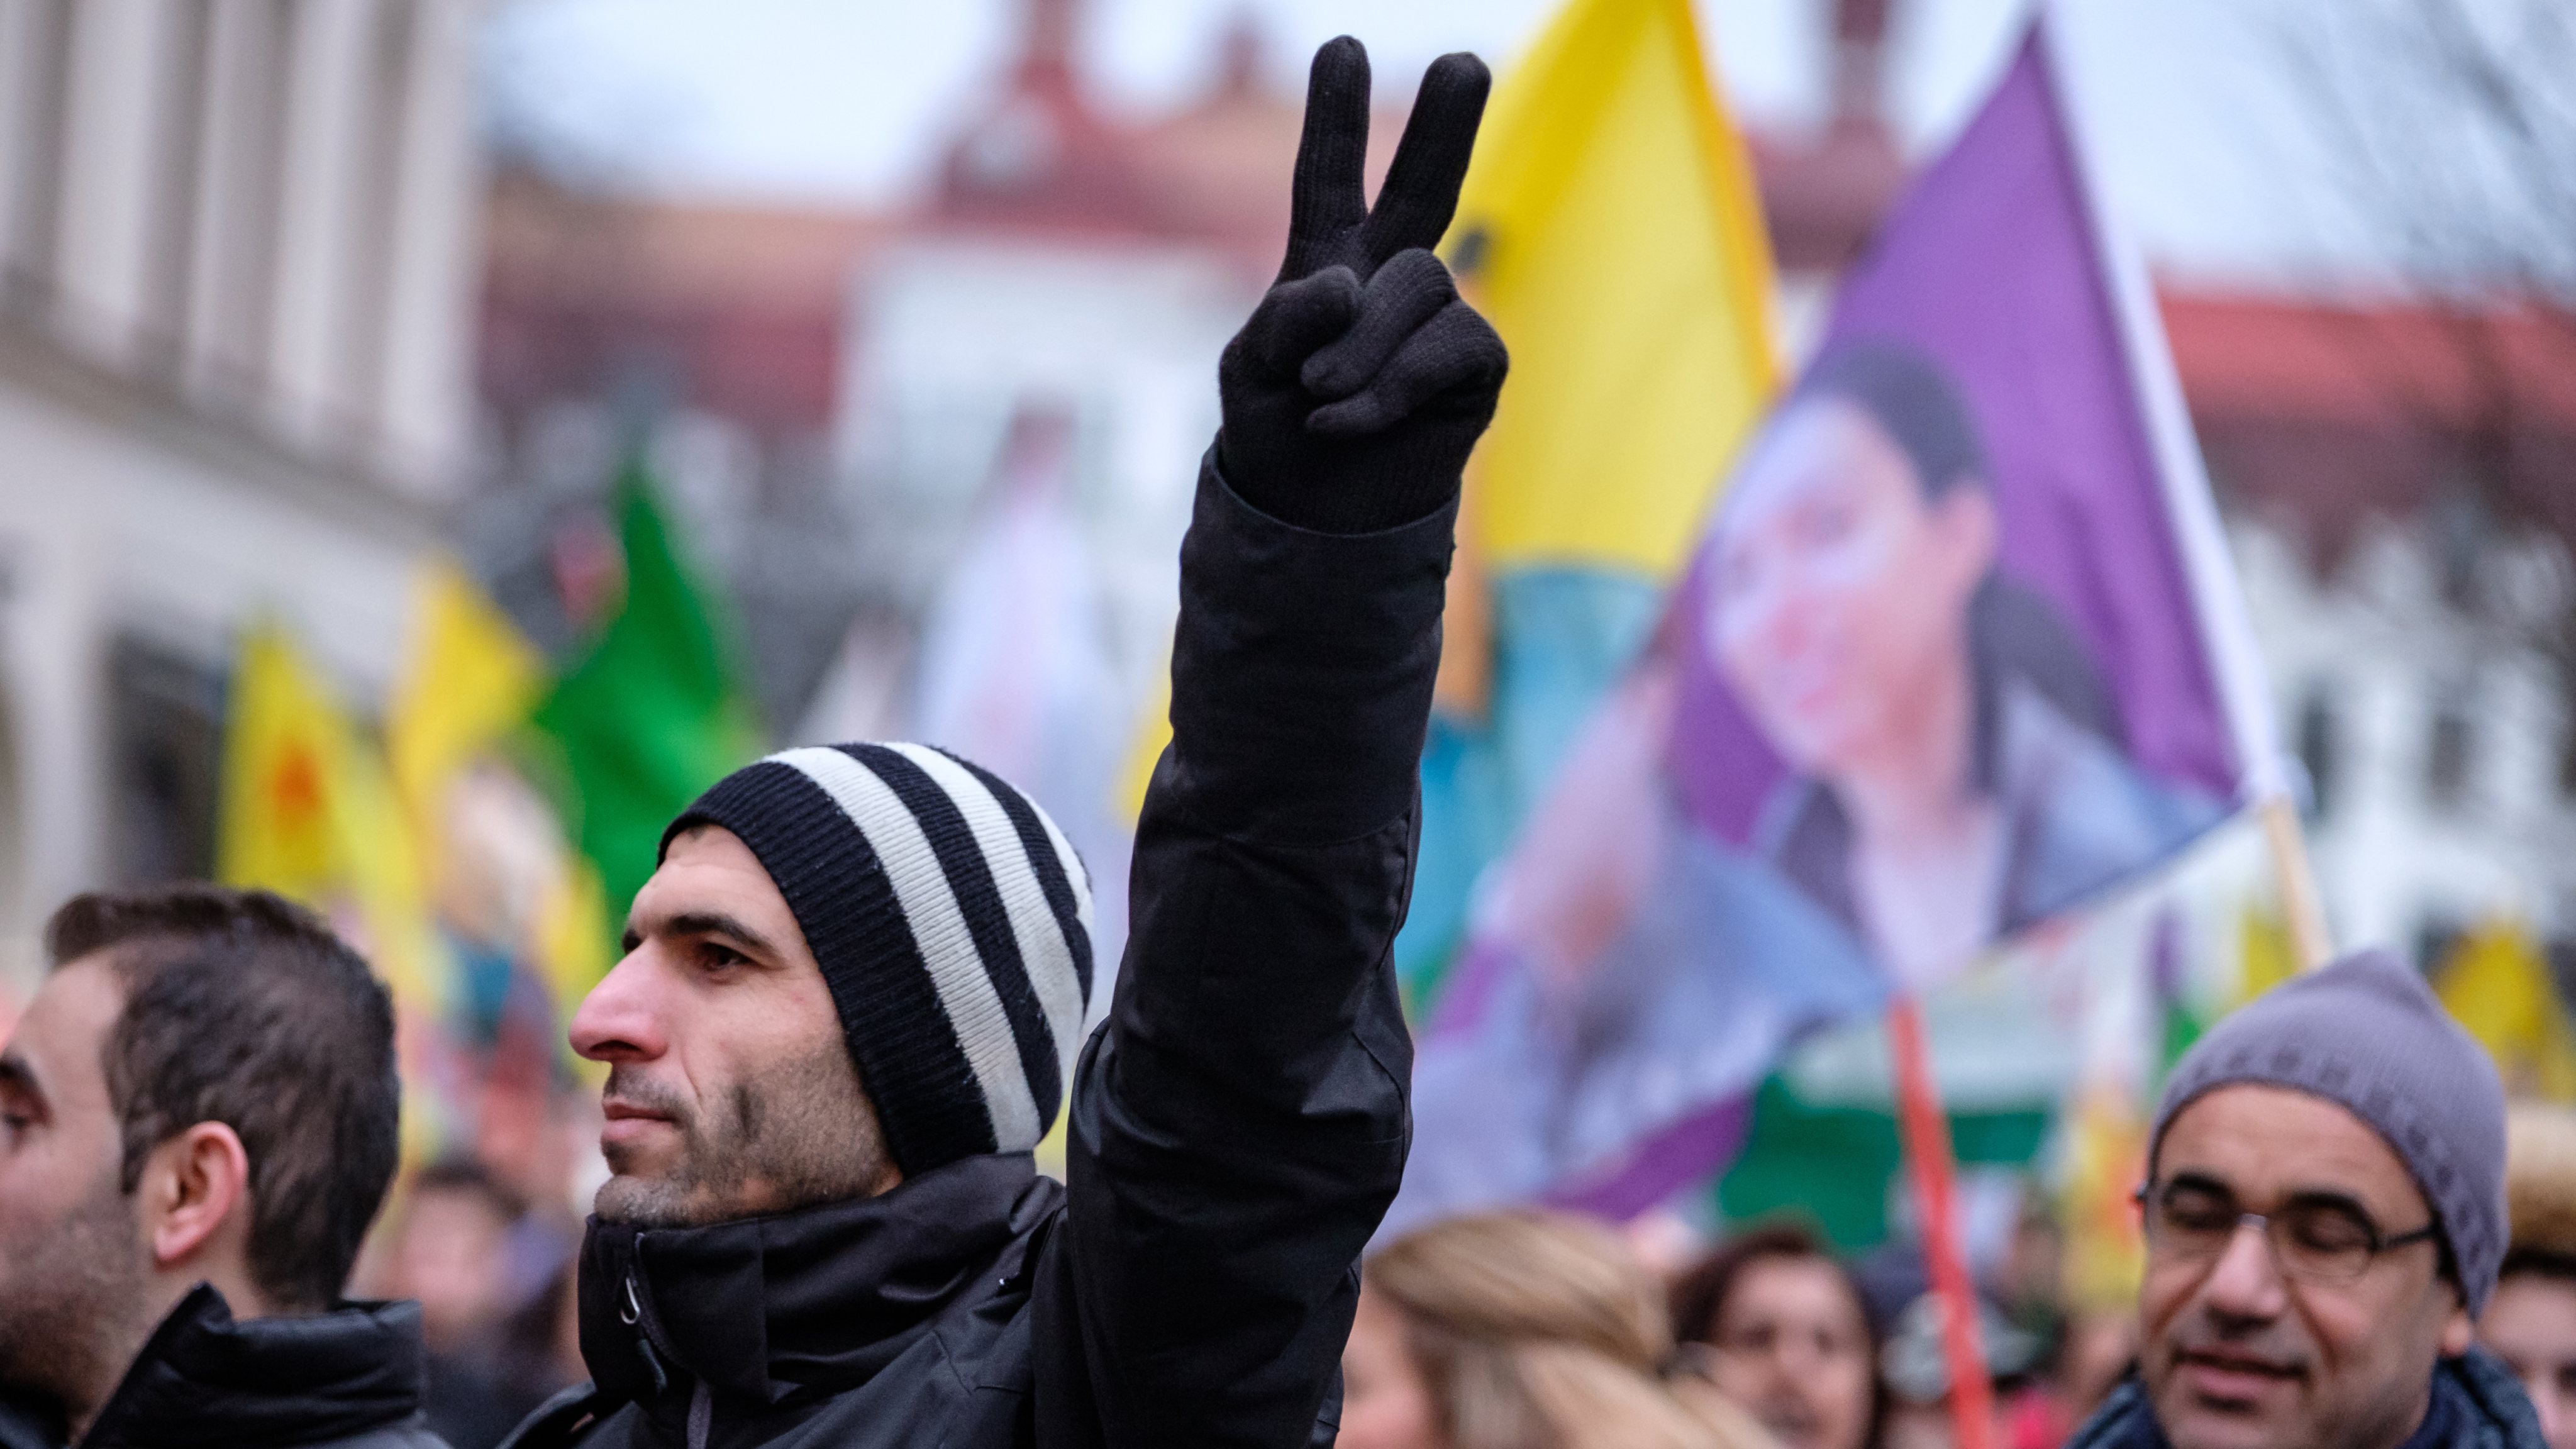 A demonstrator shows a victory sign during the demonstration